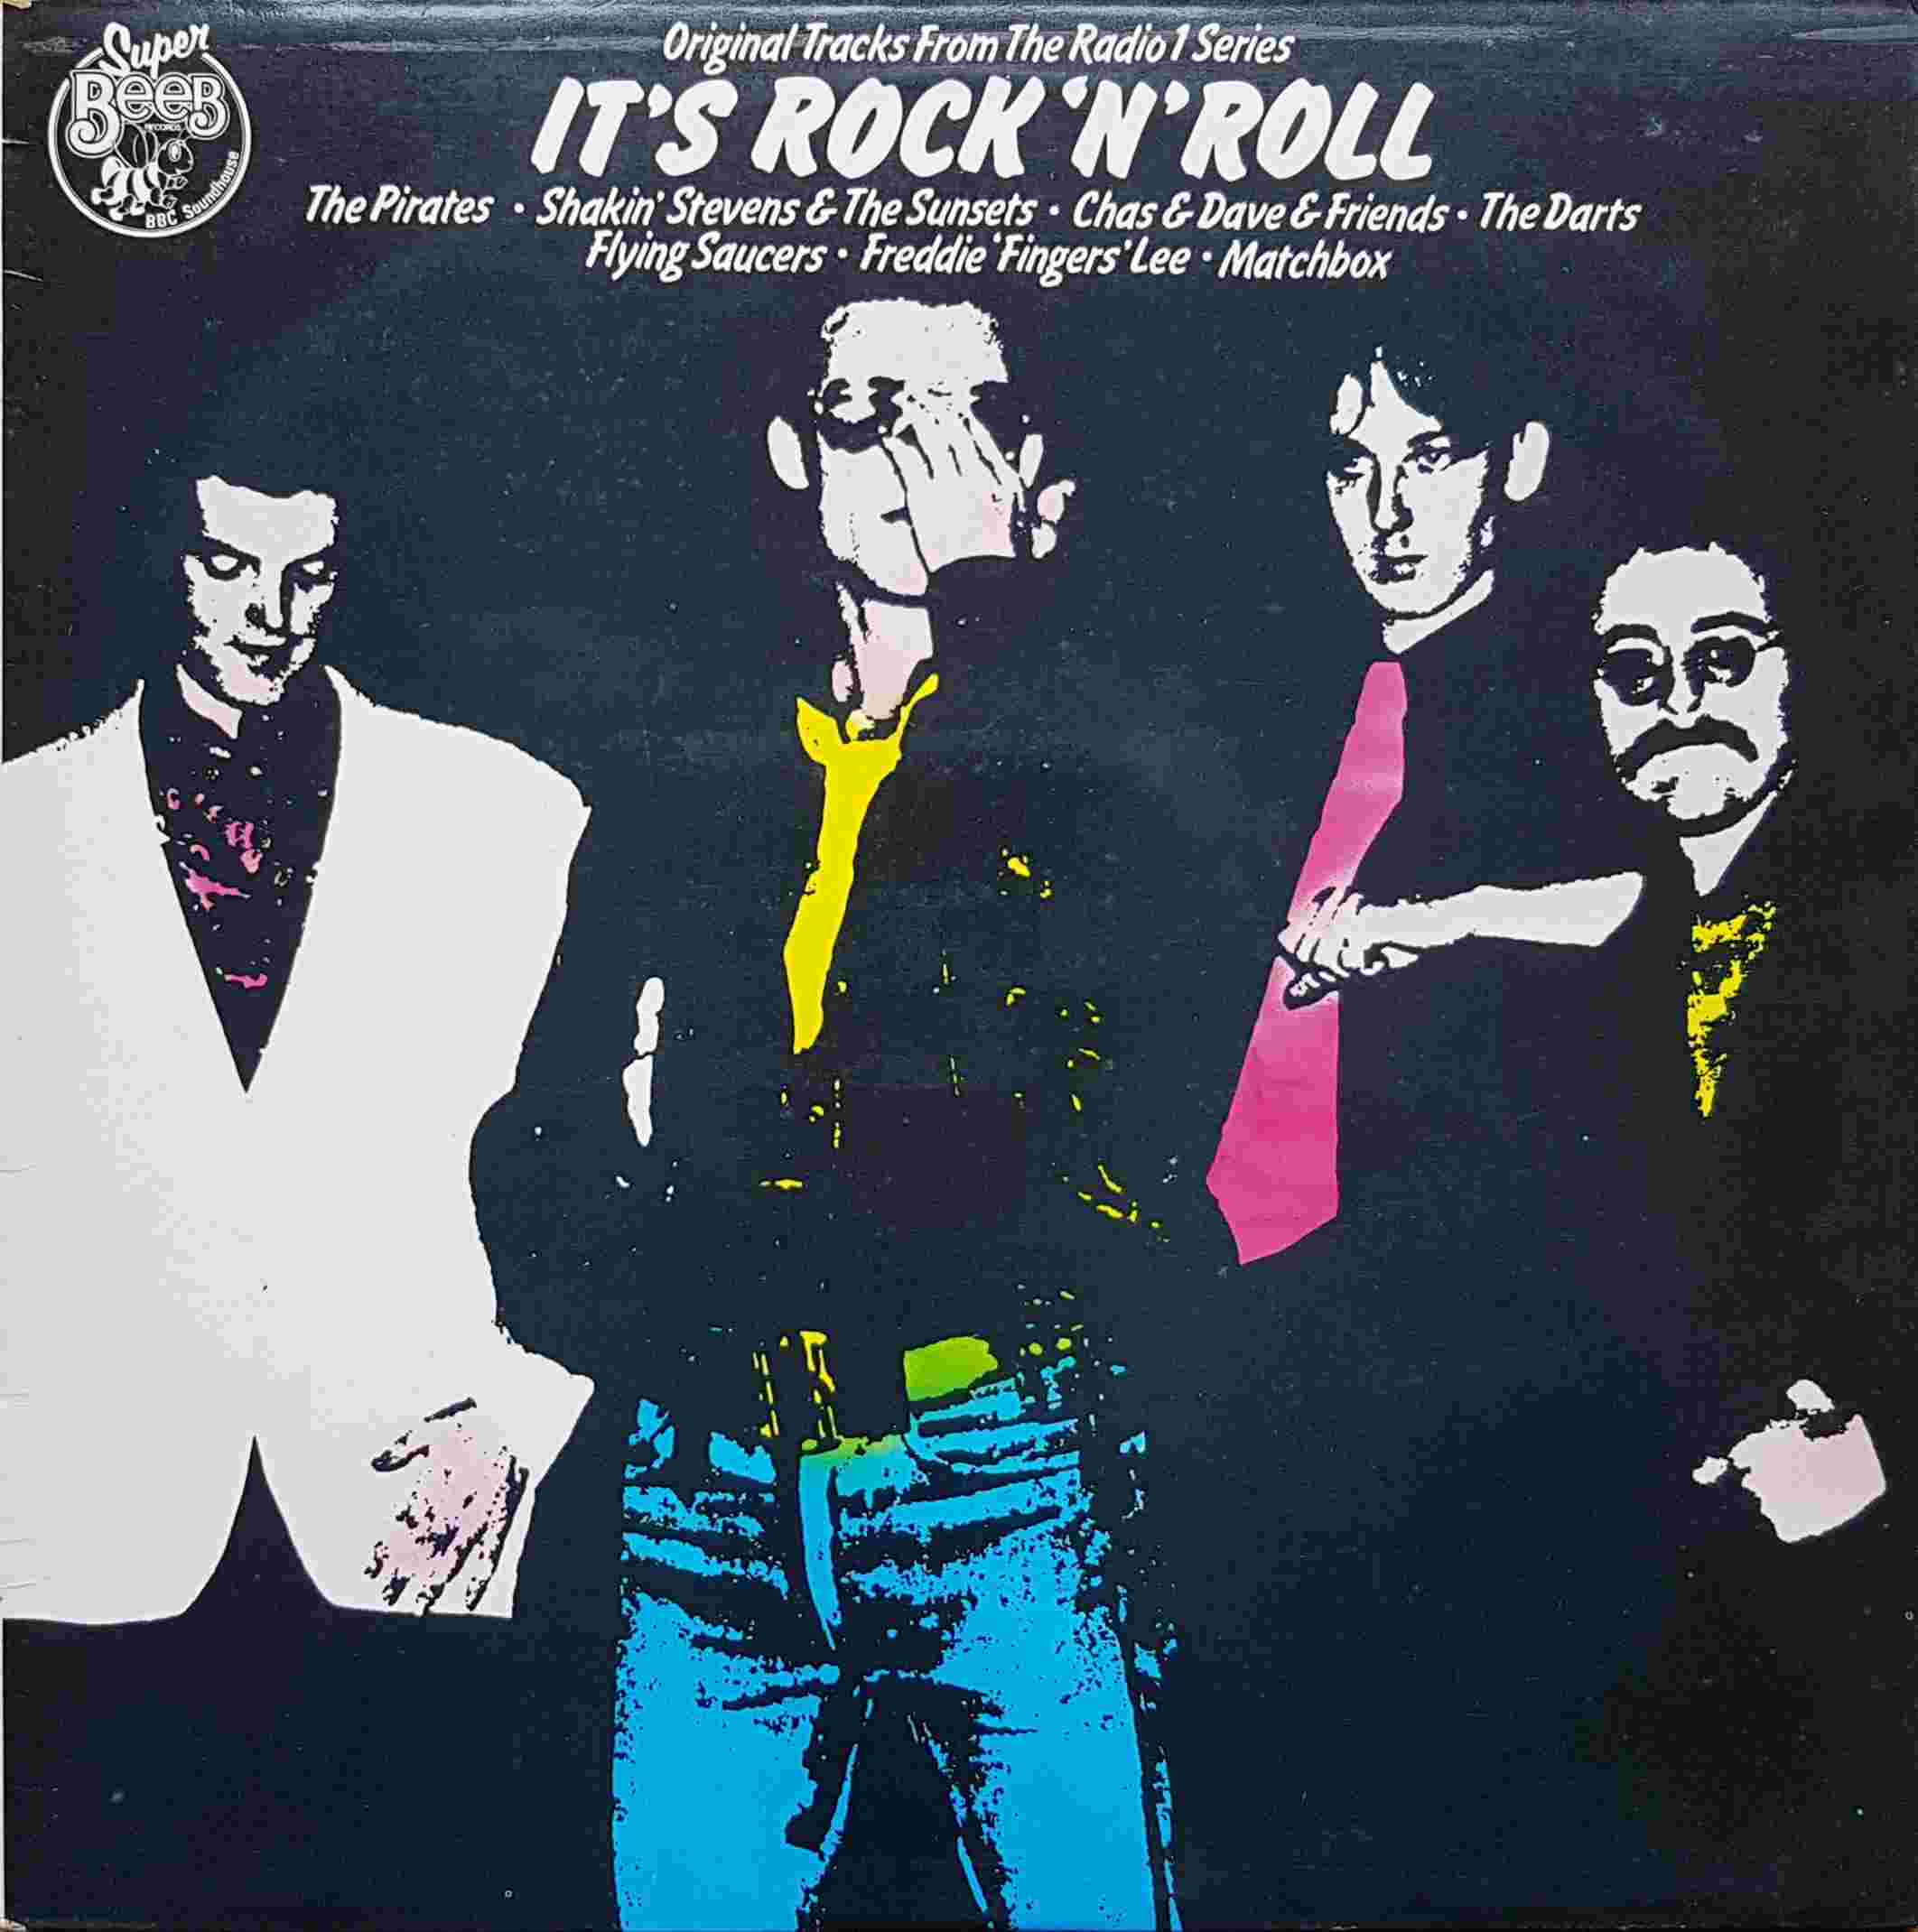 Picture of BEMP 001 It's rock 'n' roll by artist Various from the BBC albums - Records and Tapes library